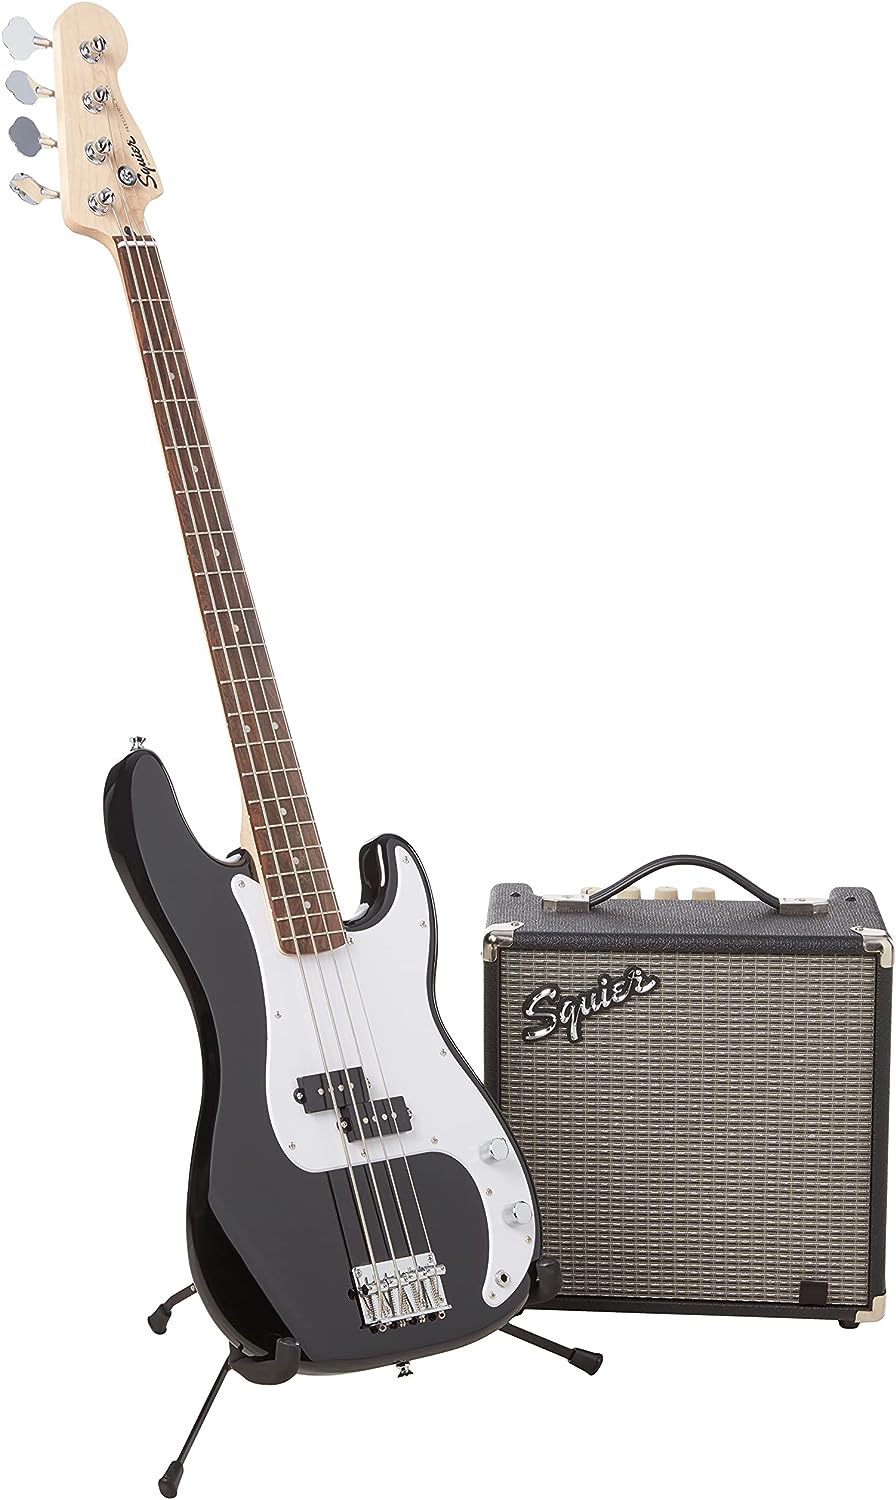 Squier by Fender Bass Guitar Kit on a white background